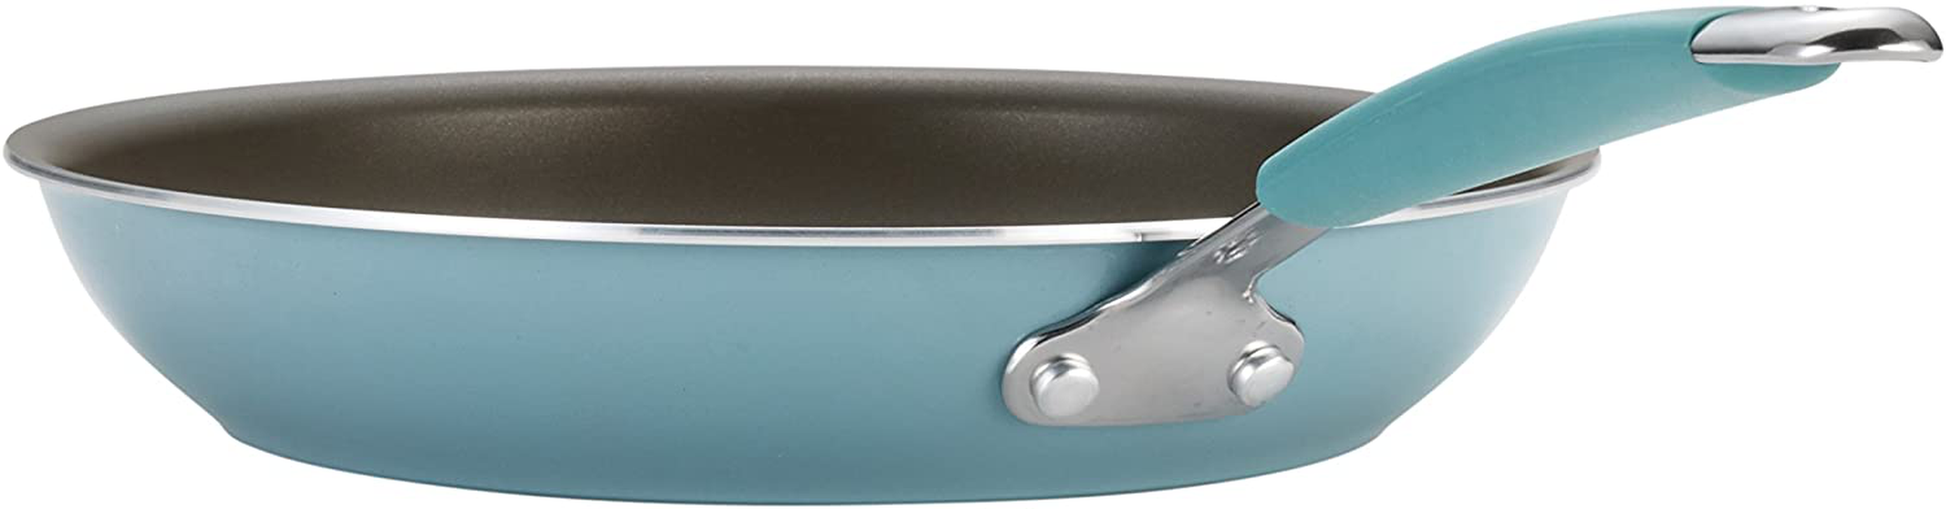 Rachael Ray Cucina Nonstick Cookware Pots and Pans Set, 12 Piece, Agave Blue